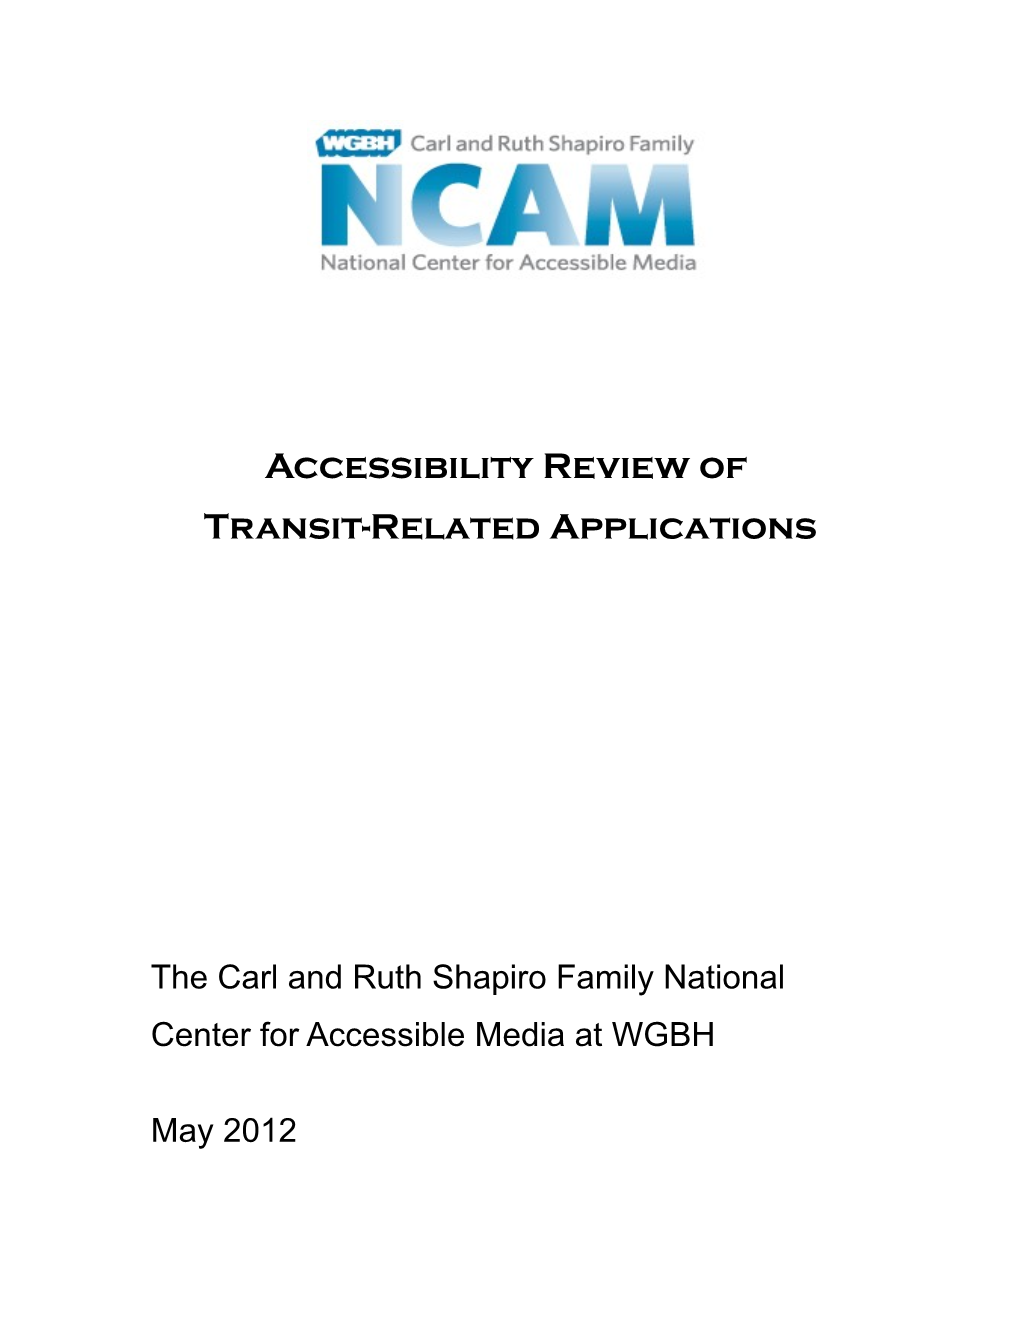 Accessibility Review of Transit-Related Applications